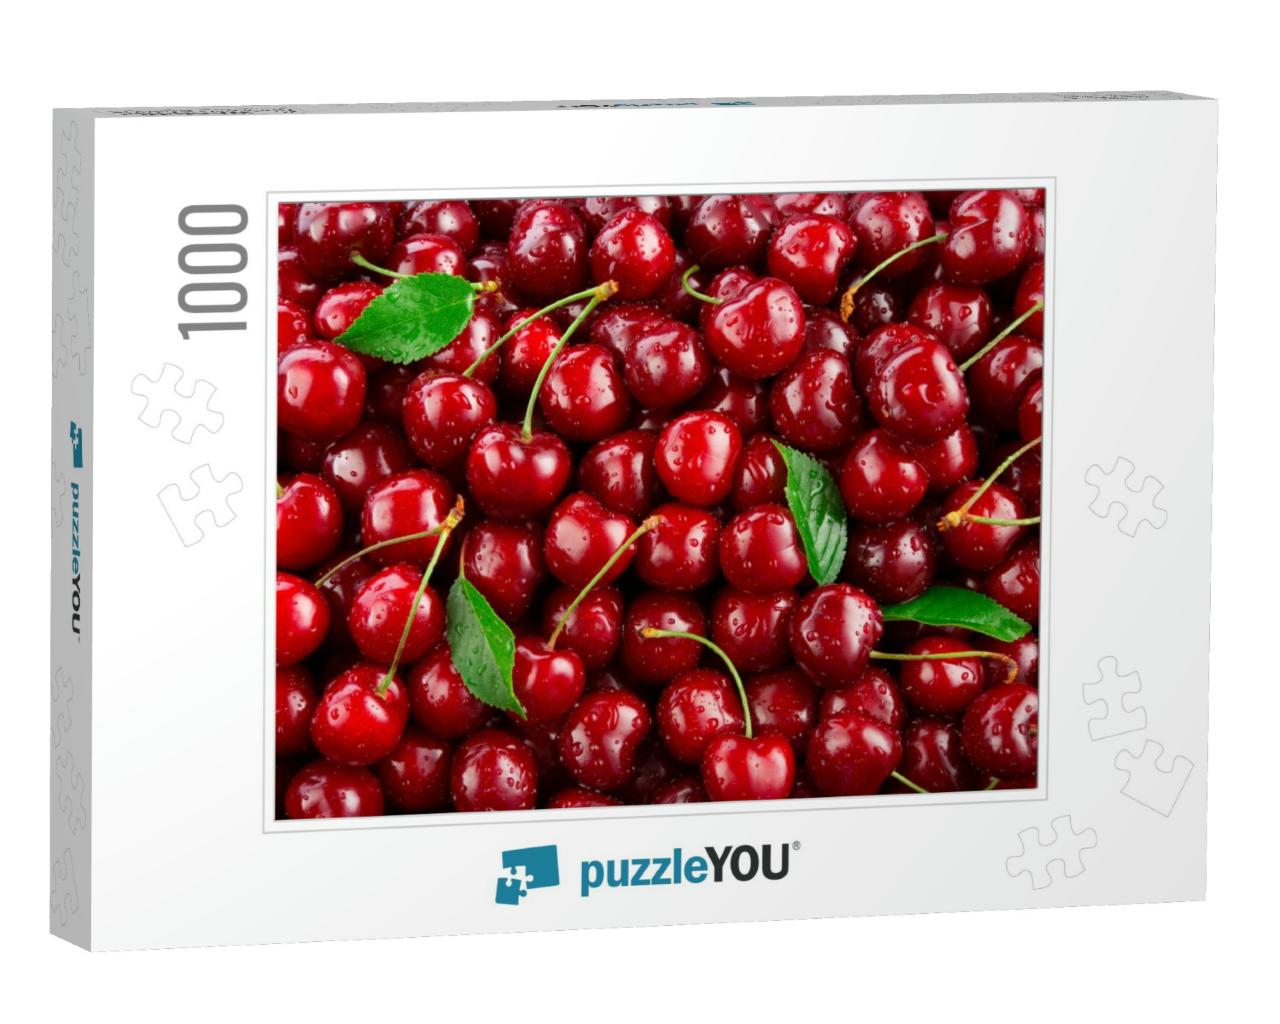 Cherry. Fresh Organic Berries with Leaves Macro. Fruit Ba... Jigsaw Puzzle with 1000 pieces